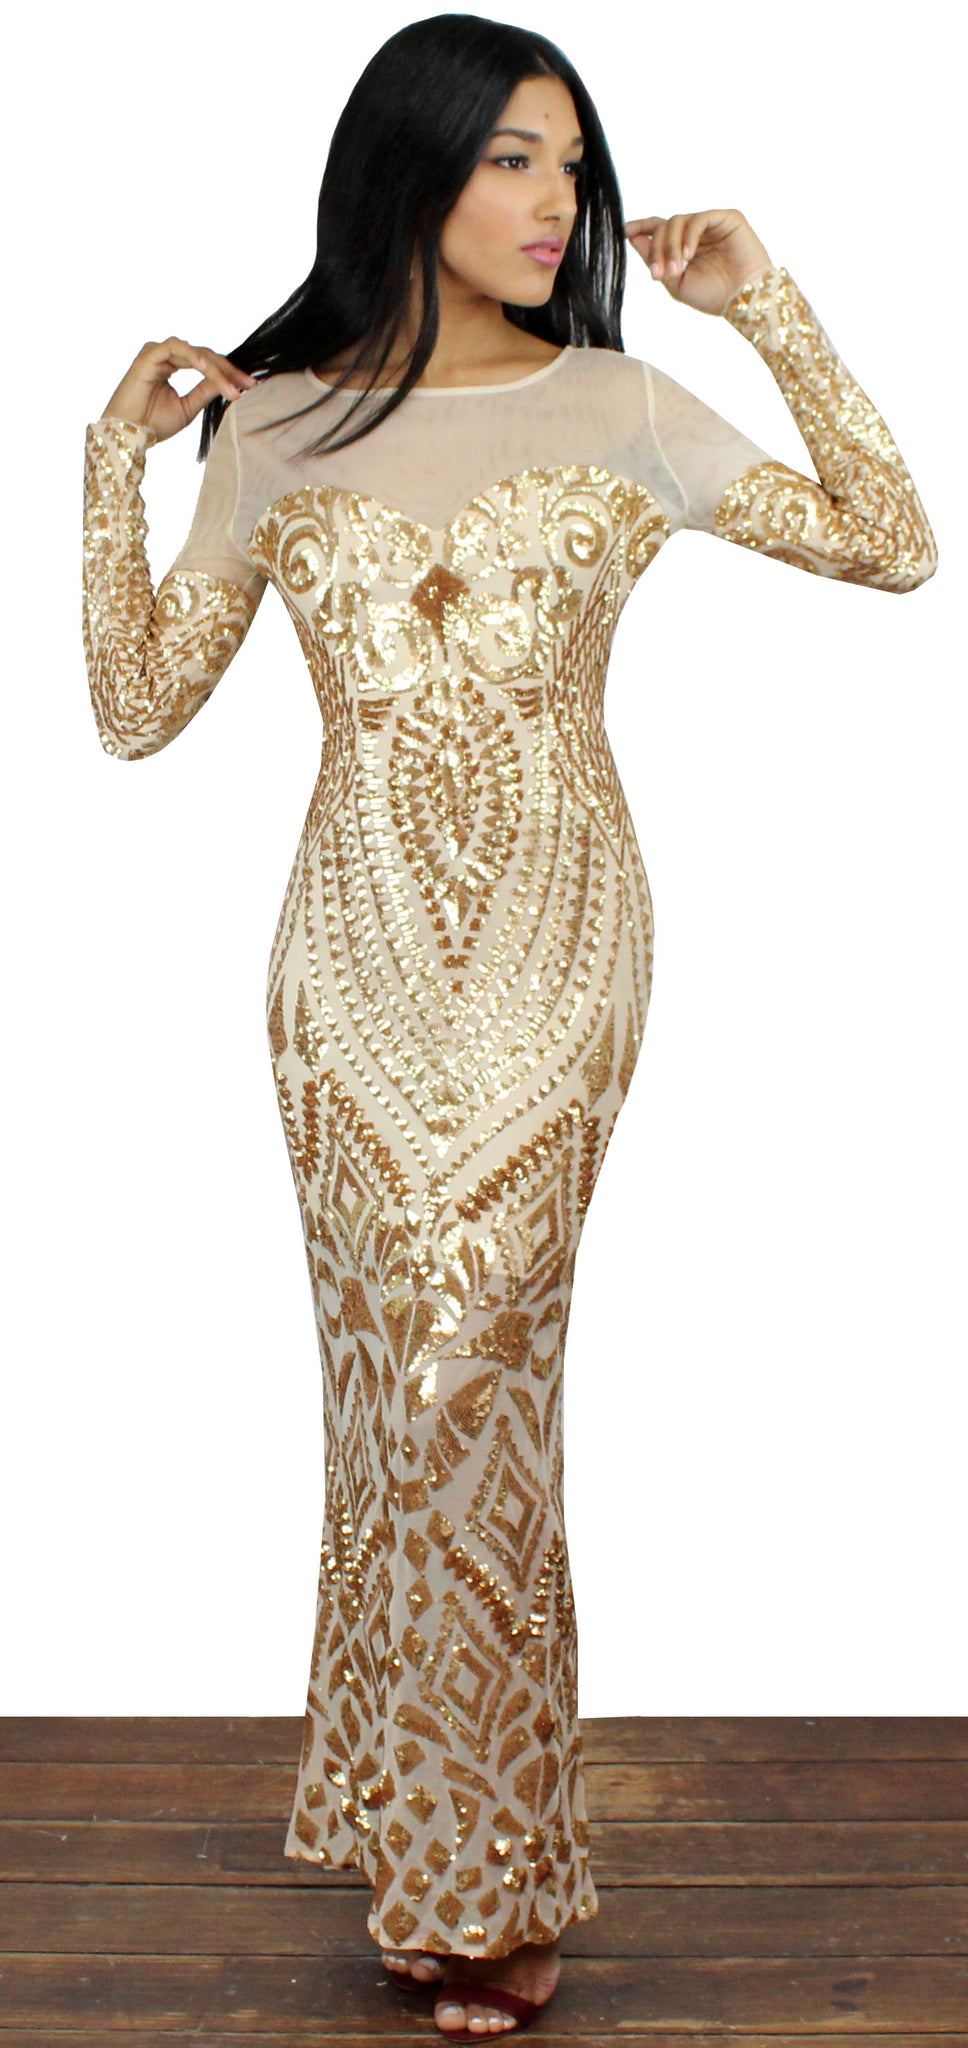 This is the Golden Dress Sequins Midi Dress